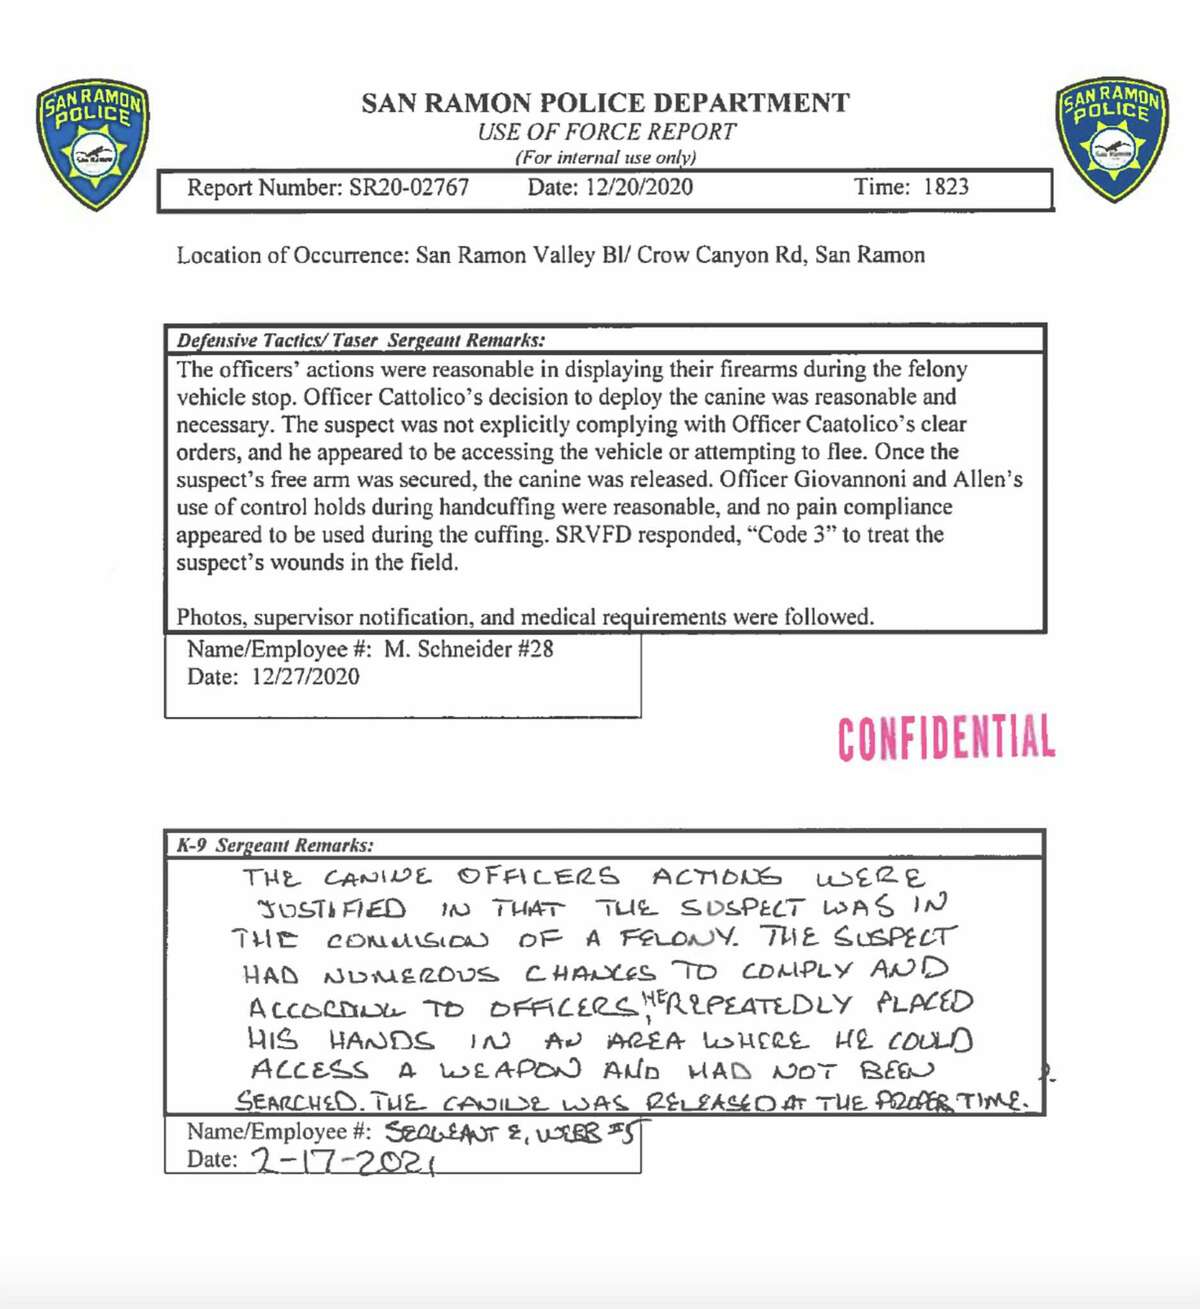 San Ramon police found a dog deployment was “justified and necessary” during the arrest of Ali Badr, according to a use-of-force report.